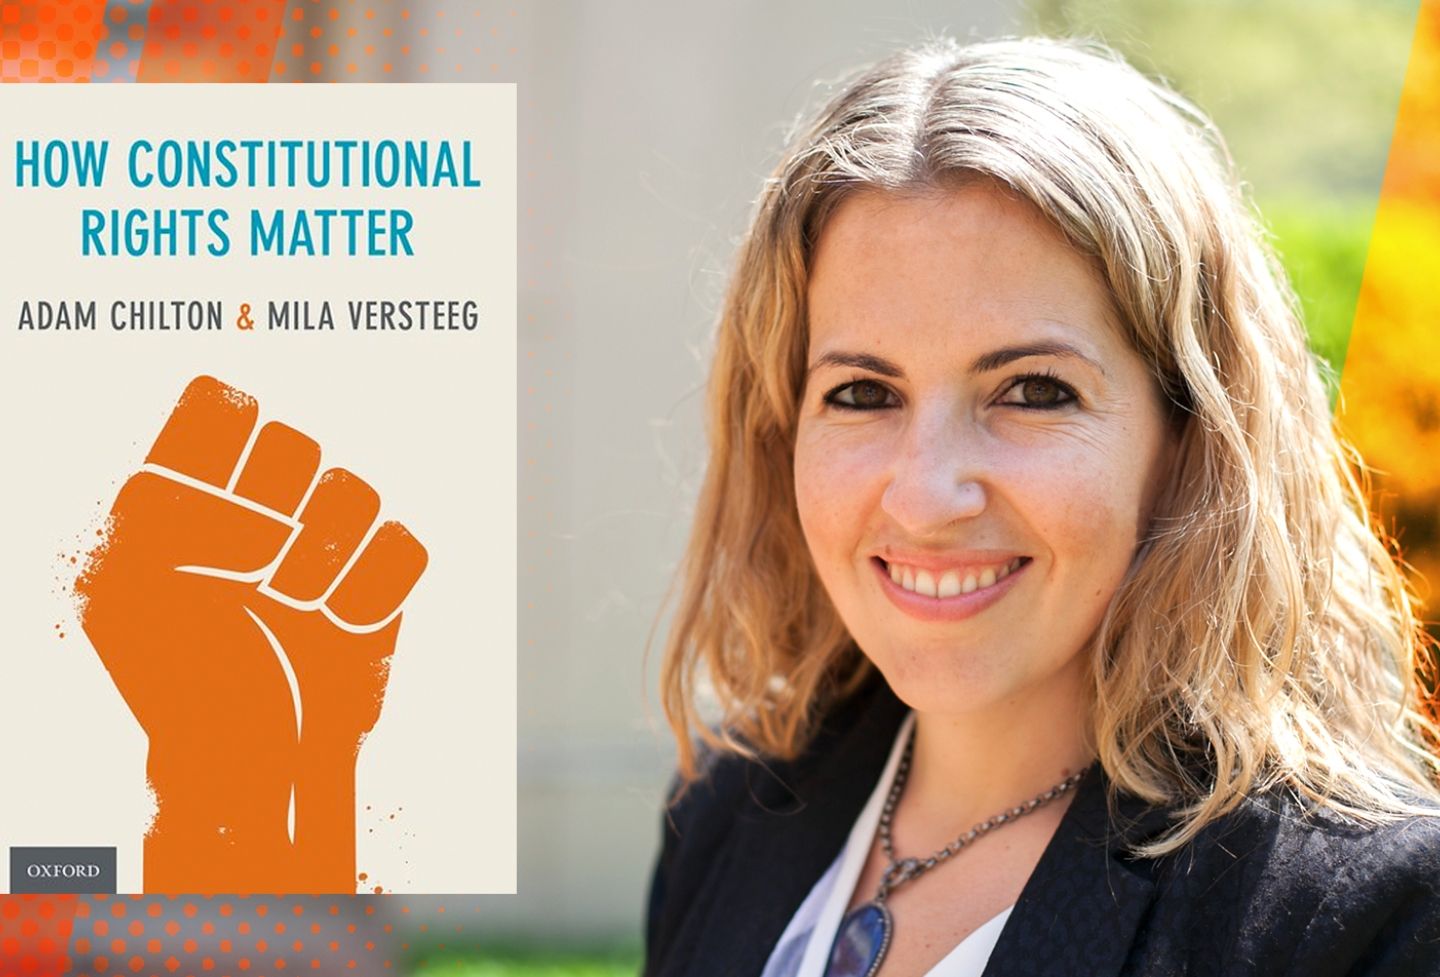 Mila Versteeg and her book "How Constitutional Rights Matter"